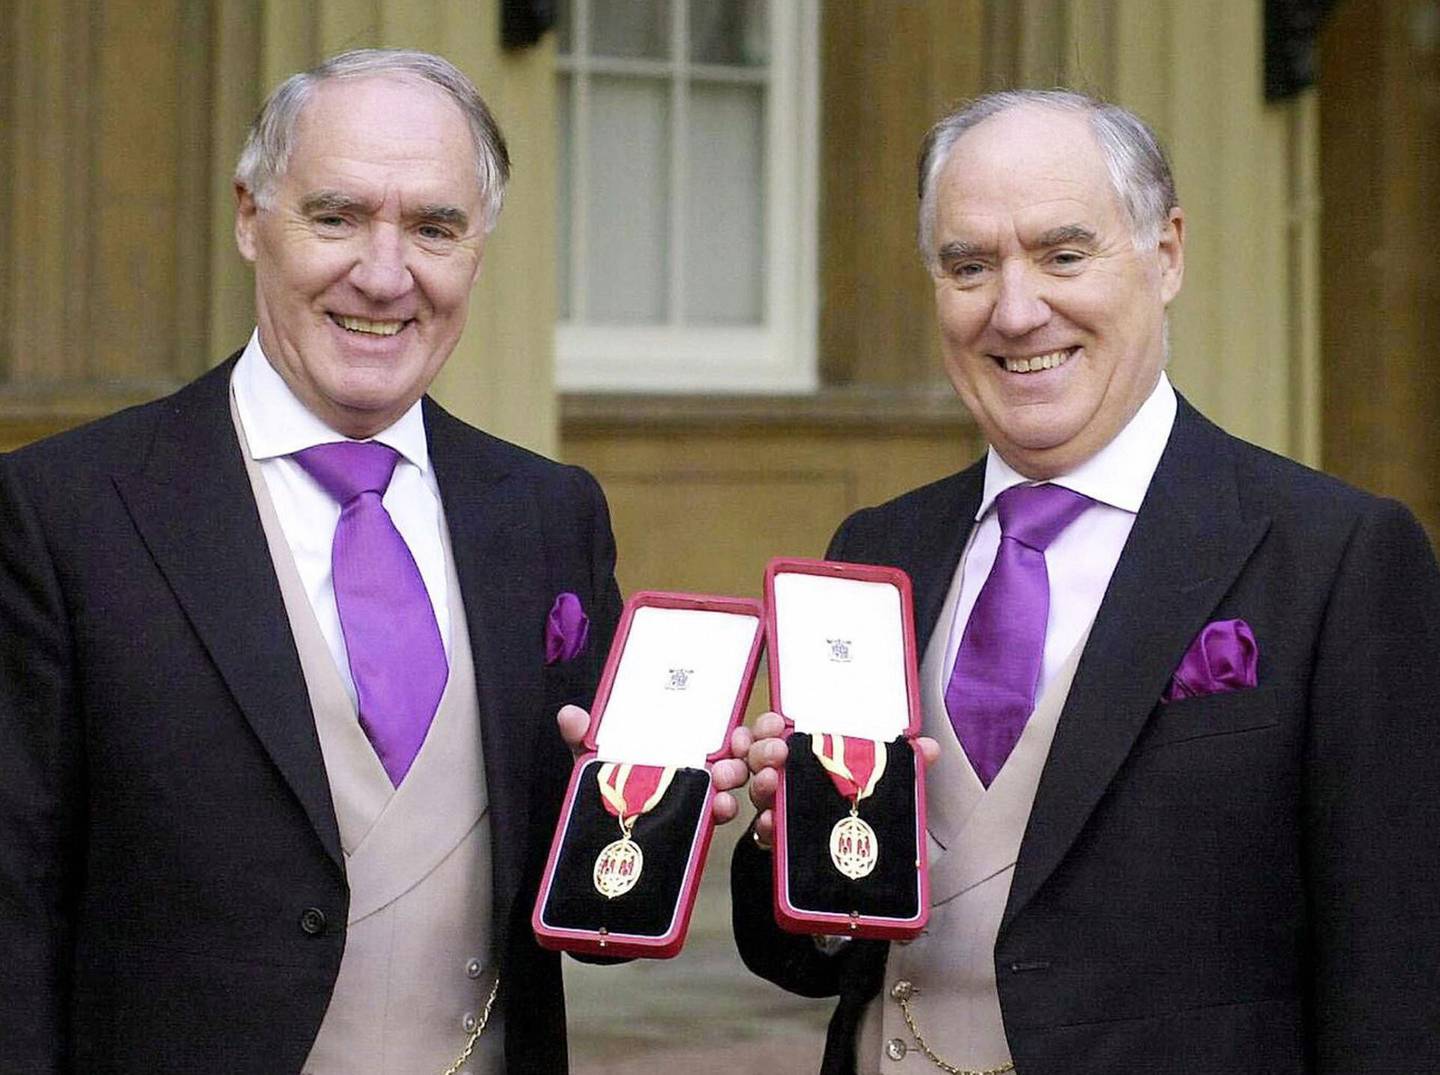 (FILES) This 31 October 2000 file photo shows Sir David Barclay (L) and his twin brother Sir Frederick posing after receiving their knighthoods from the Queen at Buckingham Palace.  In a 100-page opinion issued 26 February, 2004, which included scathing criticism of tycoon Conrad Black, Vice Chancellor Leo Strine of the Delaware Chancery Court said he was going to issue an injunction against the sale of Hollinger International to the Barclay brothers.       AFP PHOTO/WPA ROTA POOL/FILES/MICHAEL  STEPHENS (Photo by MICHAEL STEPHENS / AFP FILES / AFP)